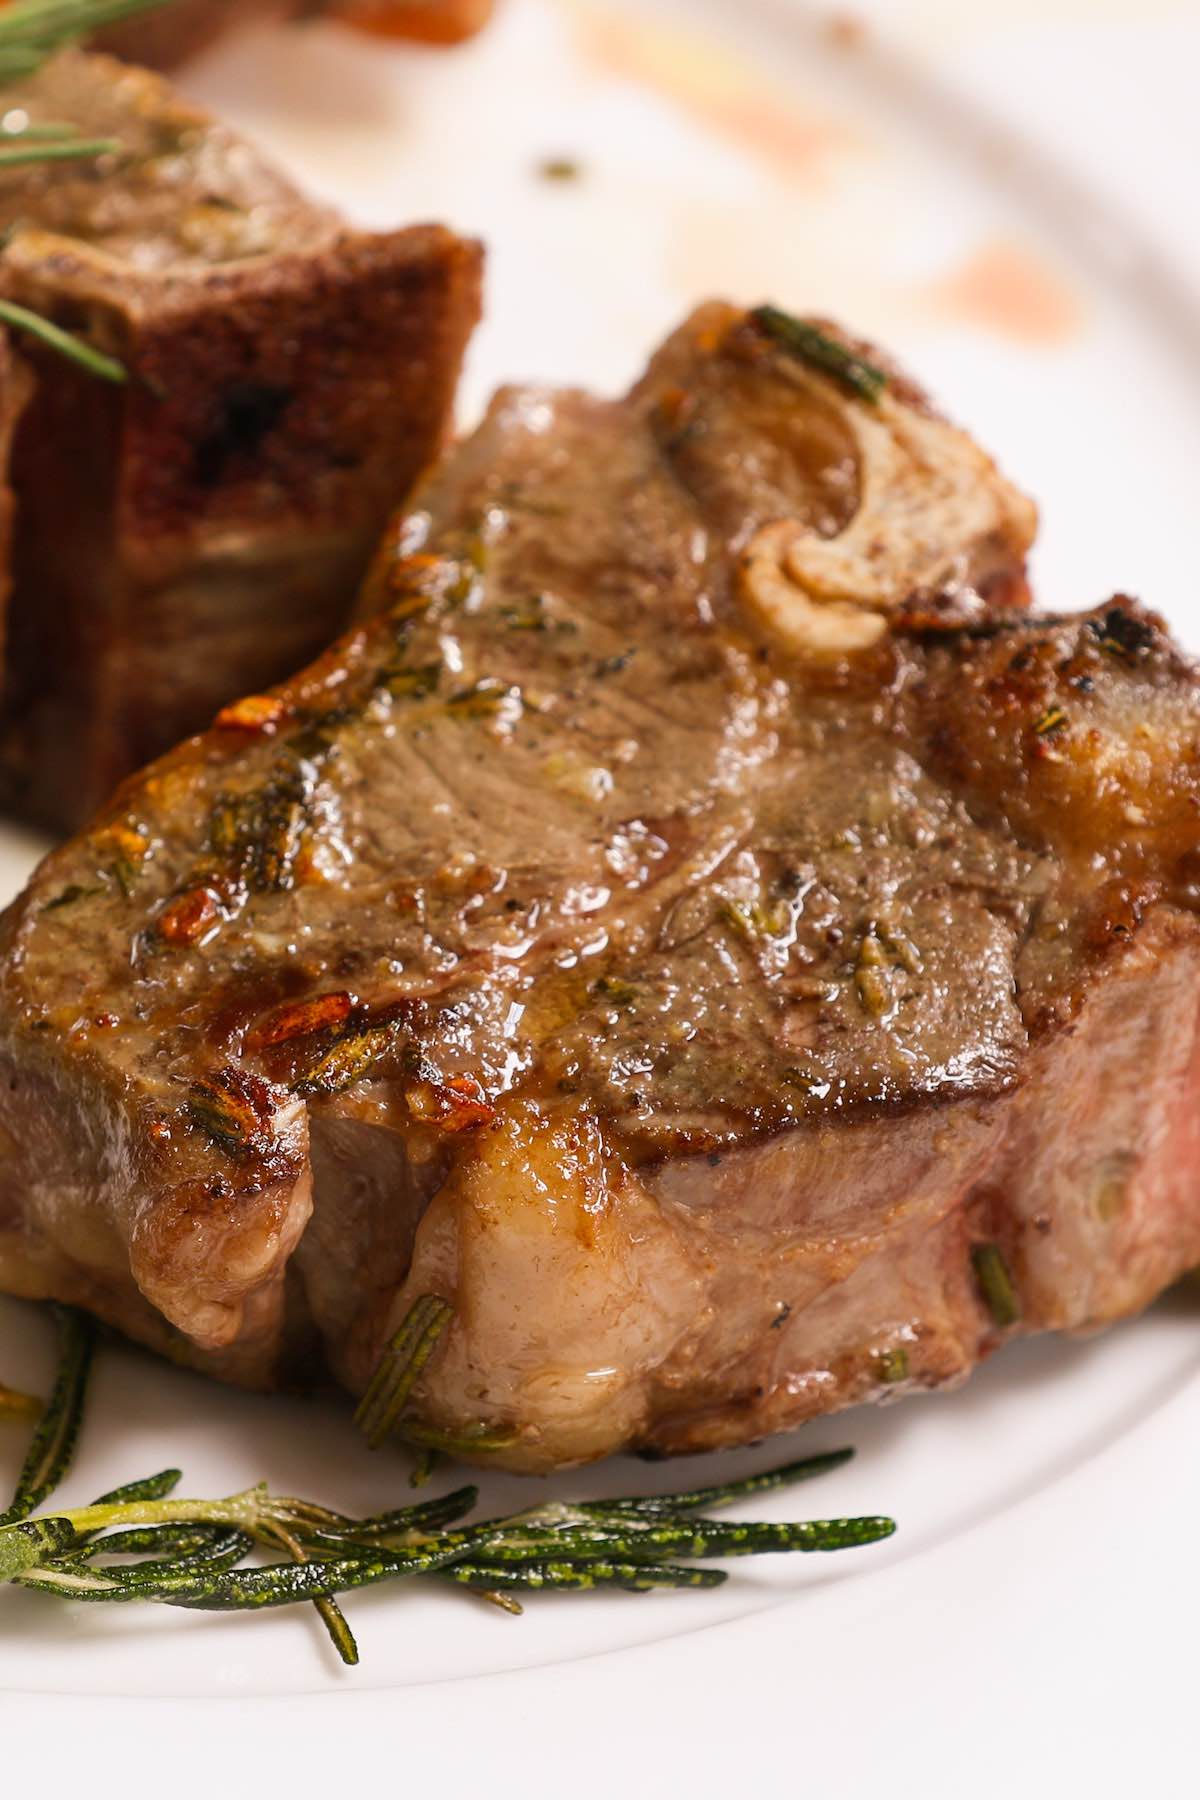 Tender Sous Vide Lamb Chops Recipe with Video - IzzyCooking